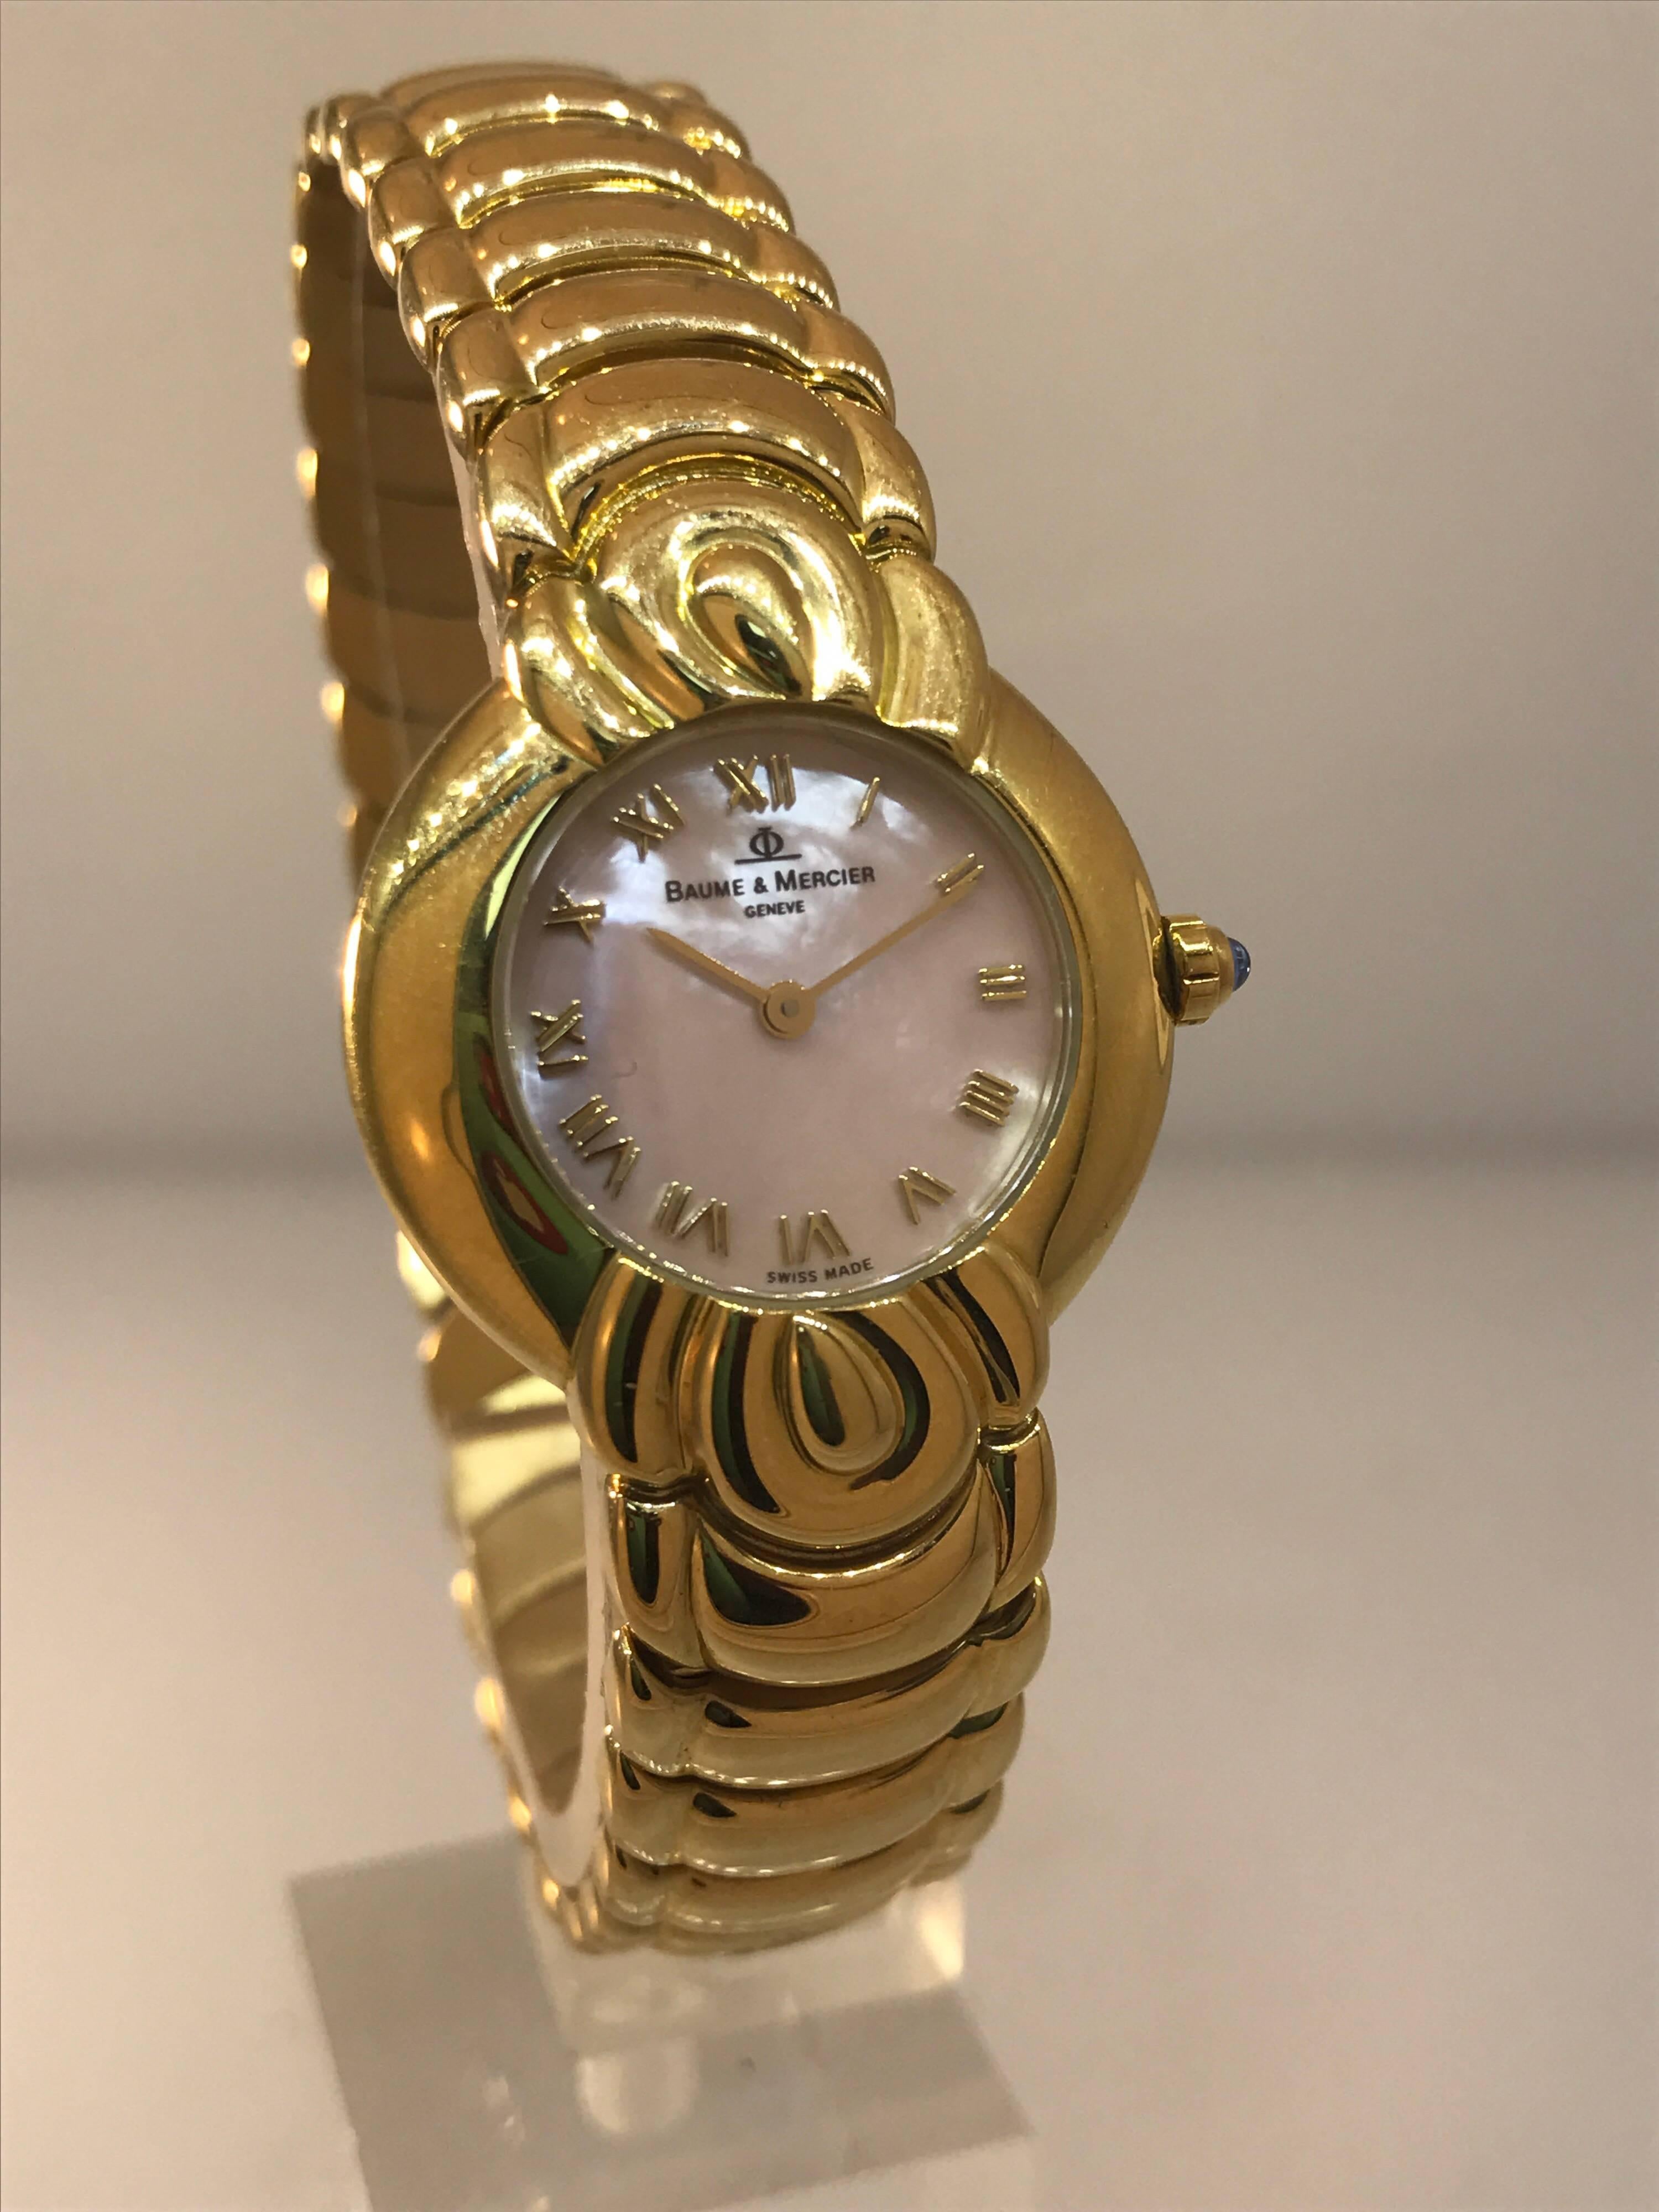 Baume & Mercier 18 Karat Gold Pink Mother-of-Pearl Dial Bracelet Women's Watch In Excellent Condition For Sale In New York, NY